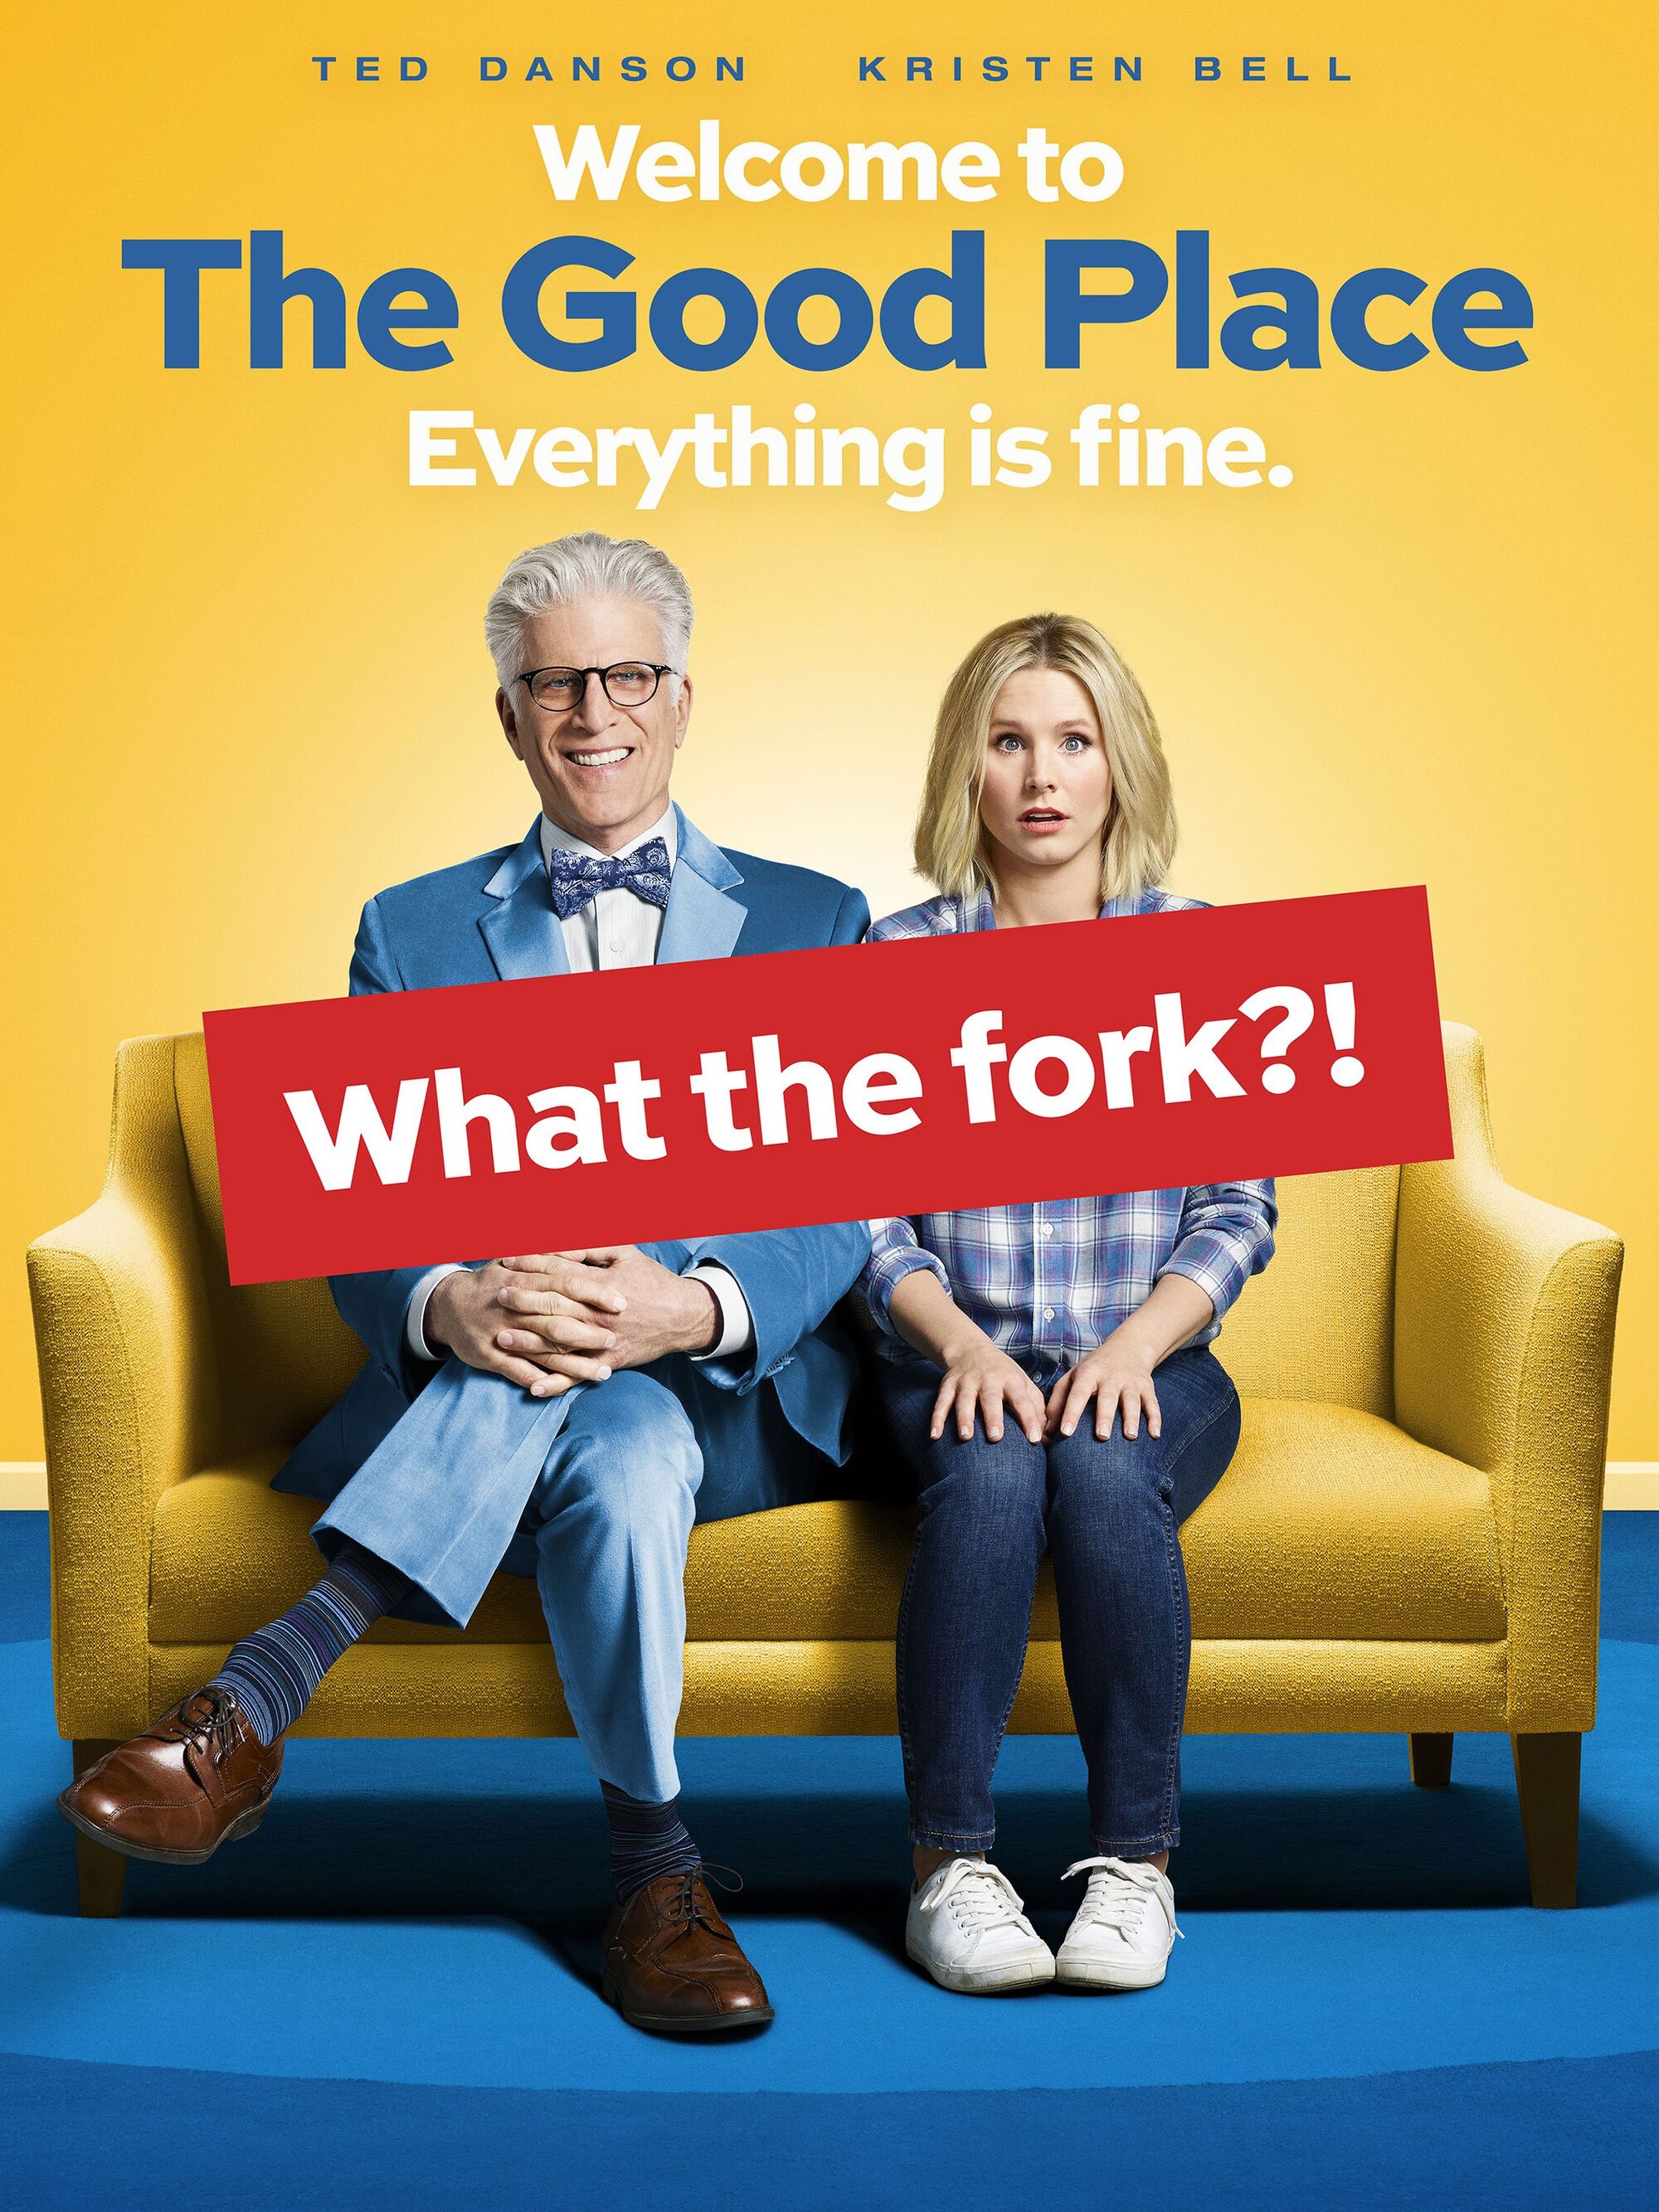 The Good Place | The Good Place Wikia | FANDOM powered by ...